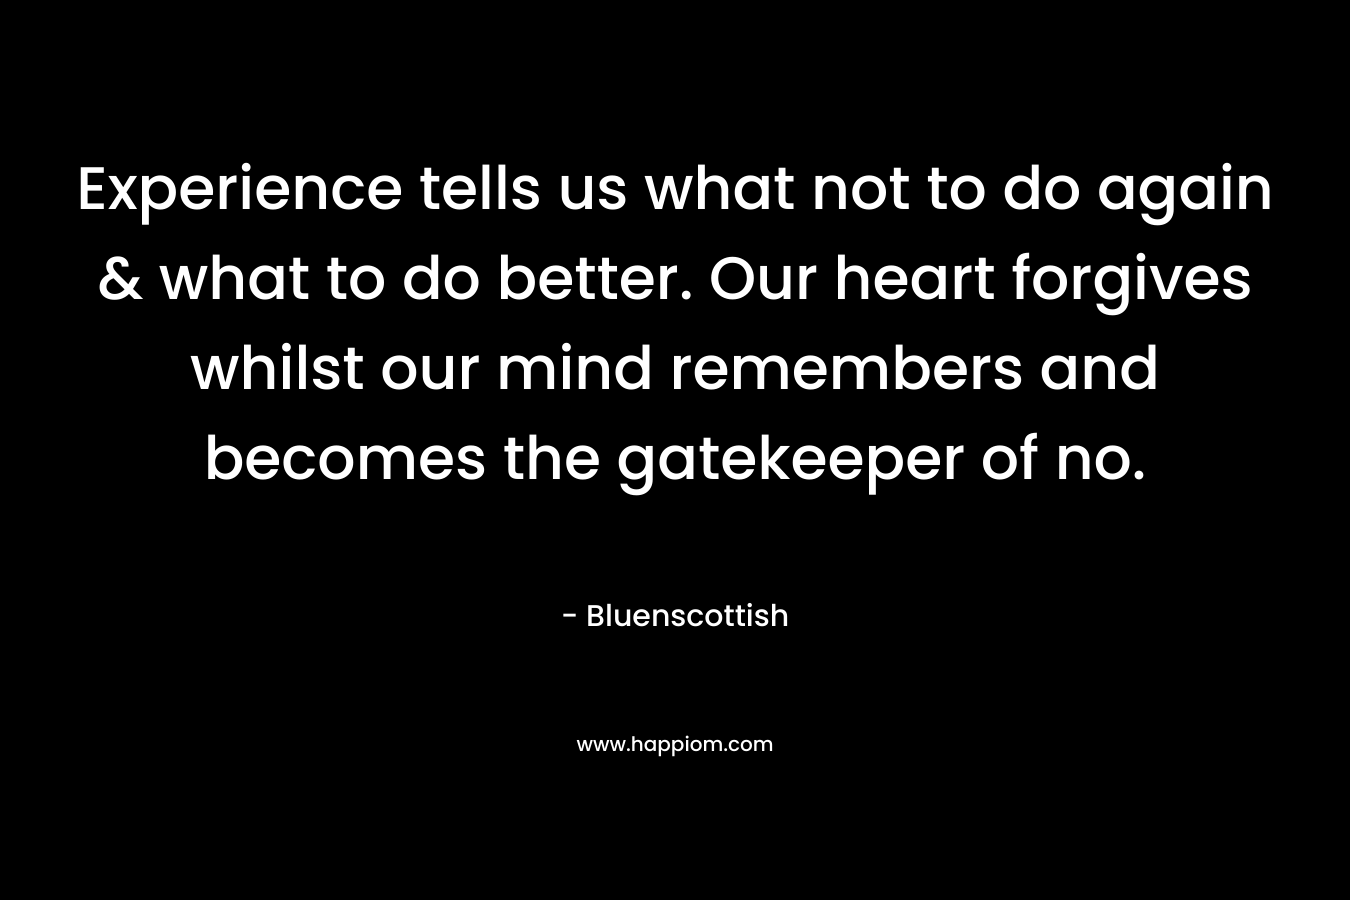 Experience tells us what not to do again & what to do better. Our heart forgives whilst our mind remembers and becomes the gatekeeper of no.